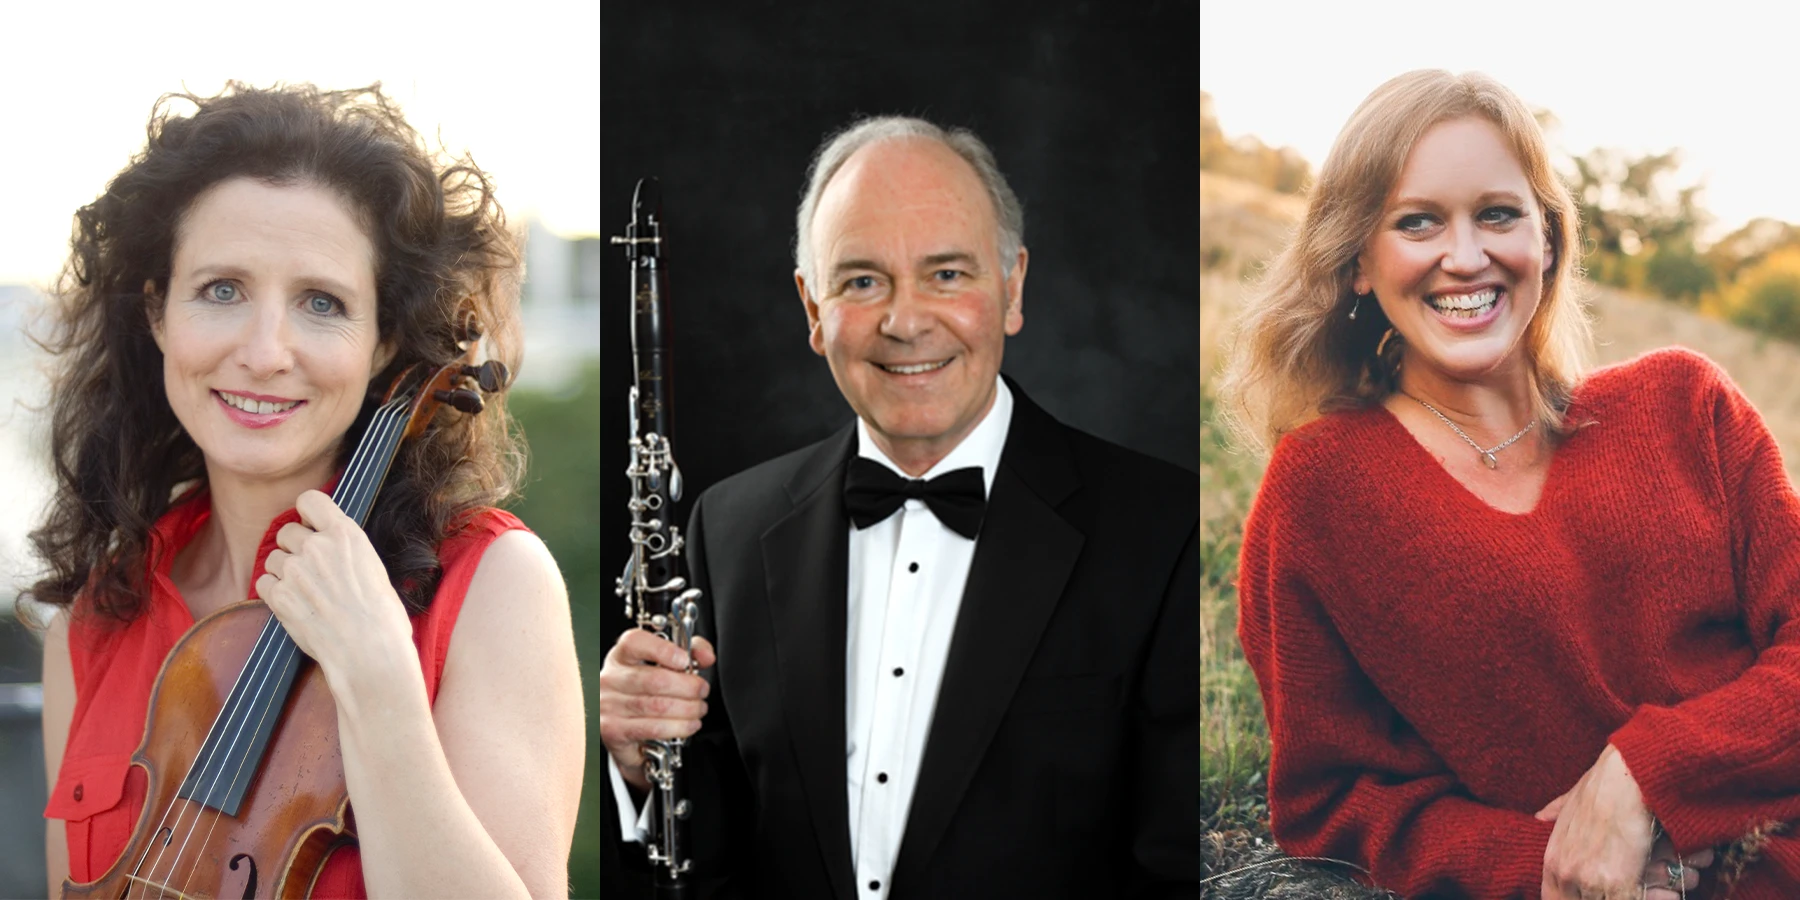 Pianist Anna Tilbrook, violinist Madeleine Mitchell and clarinettist David Campbell perform works by Delius, Elgar, Holst, Maxwell Davies and Birtwistle at JAM on the Marsh.